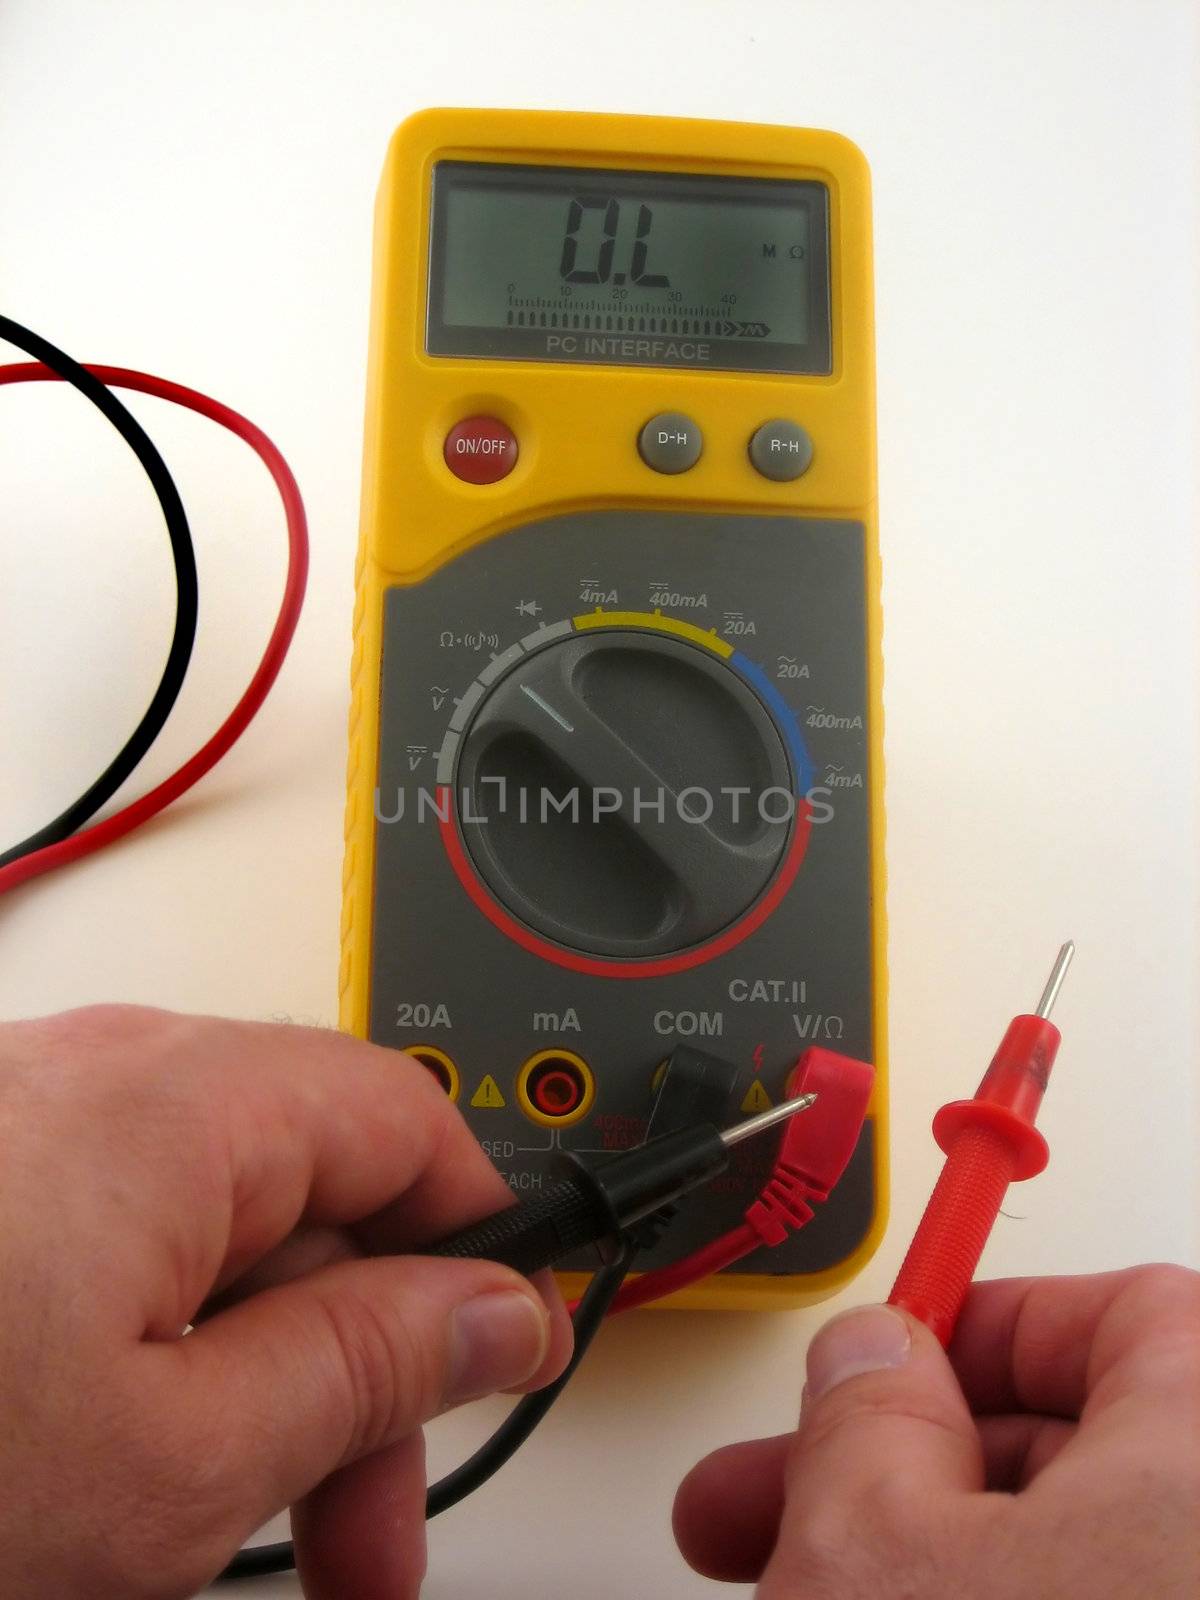 Pictures of an electronic multimeter